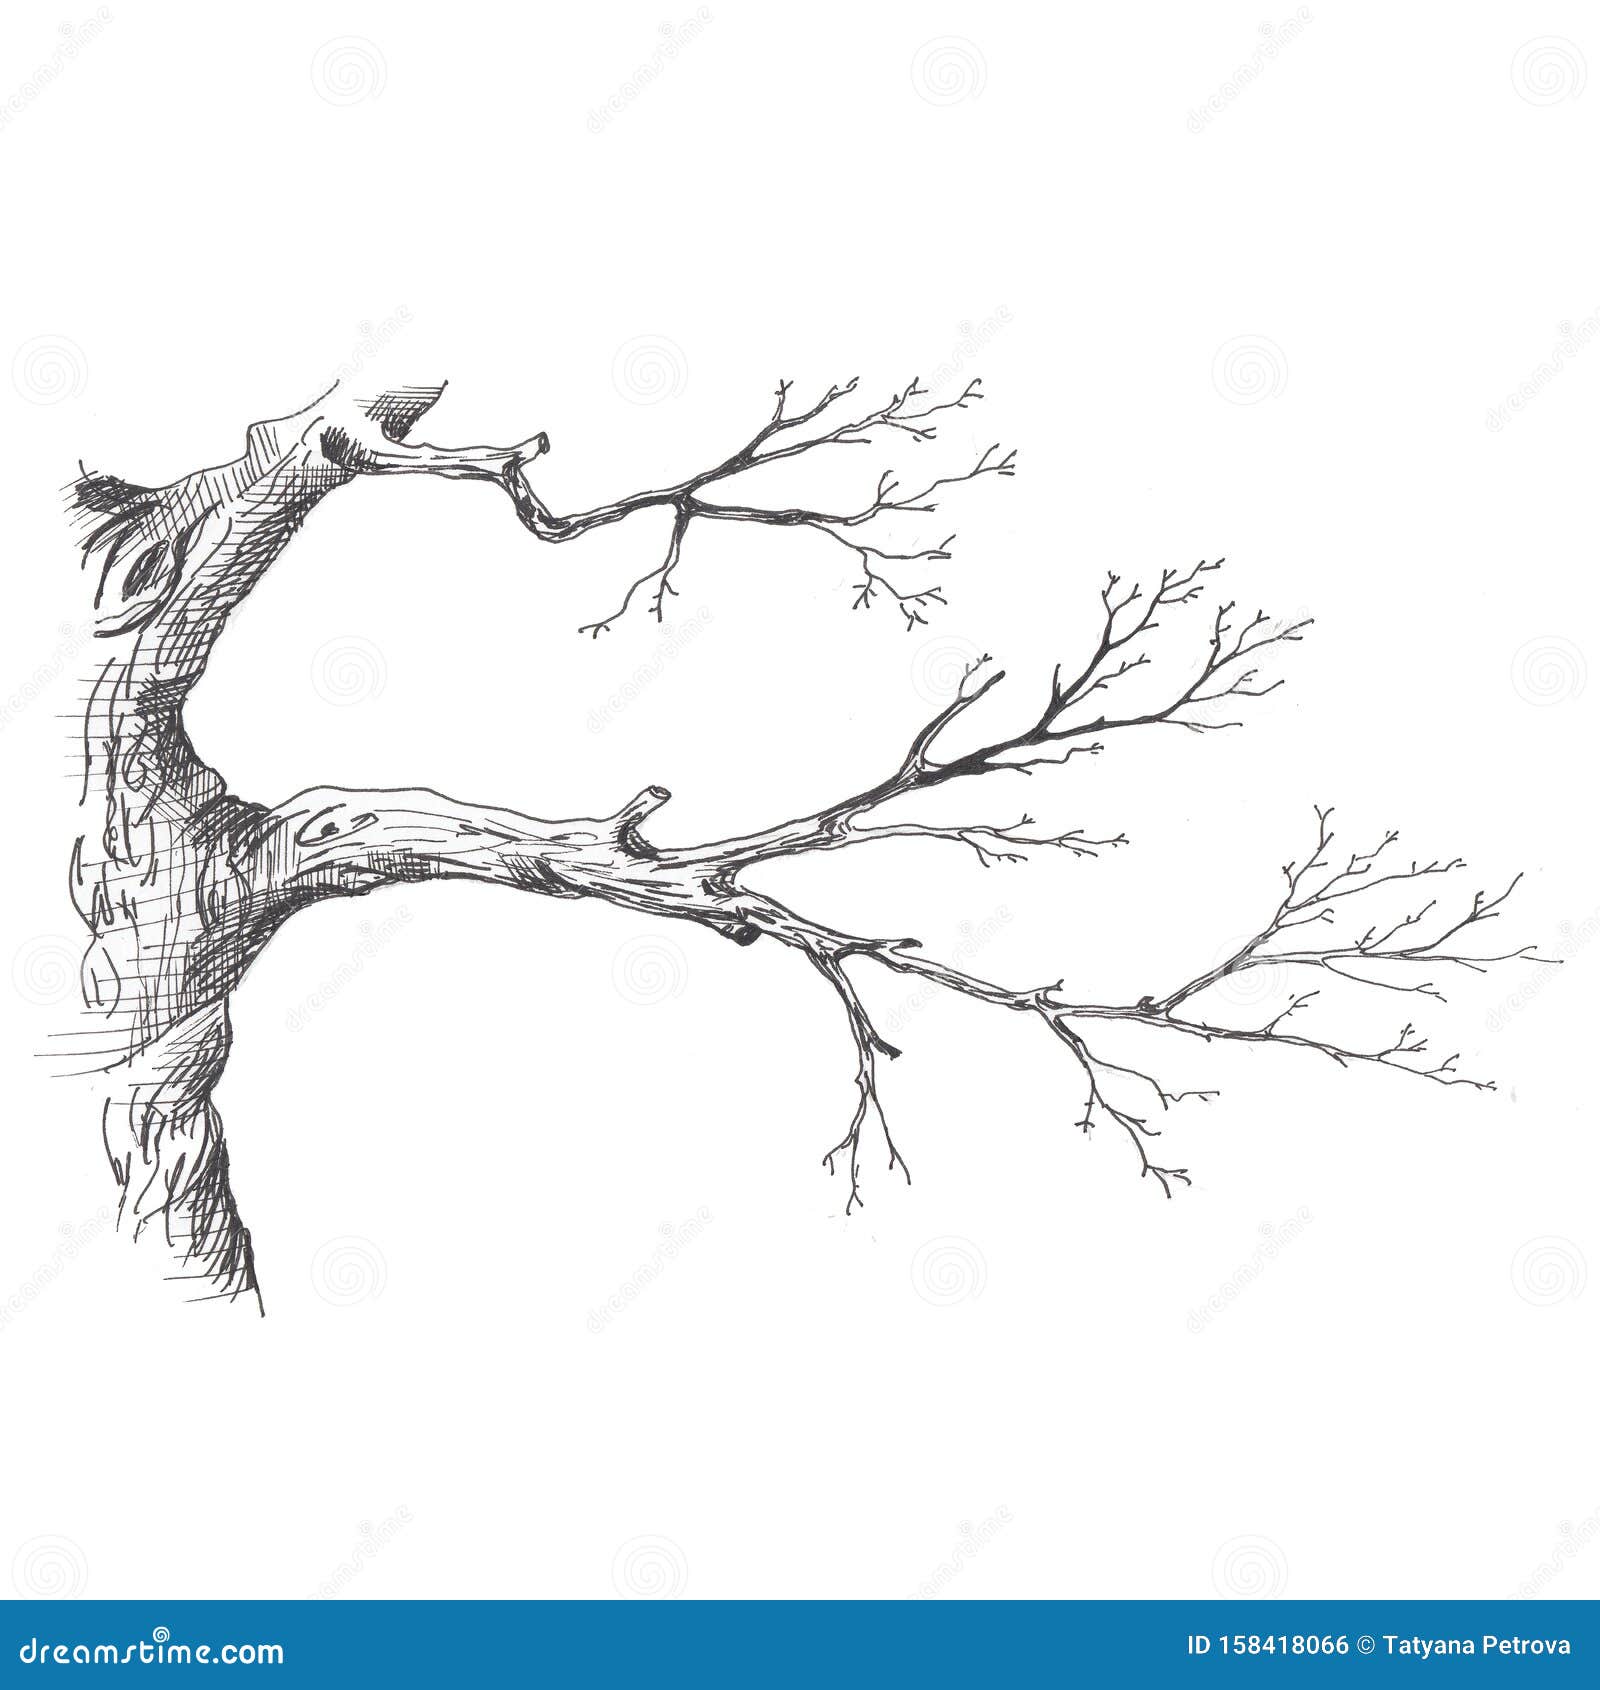 Tree Branch Hand Drawn Sketch Style Illustration Of Tree Branch Without Leaves Isolated On White Background Stock Illustration Illustration Of Forest Season